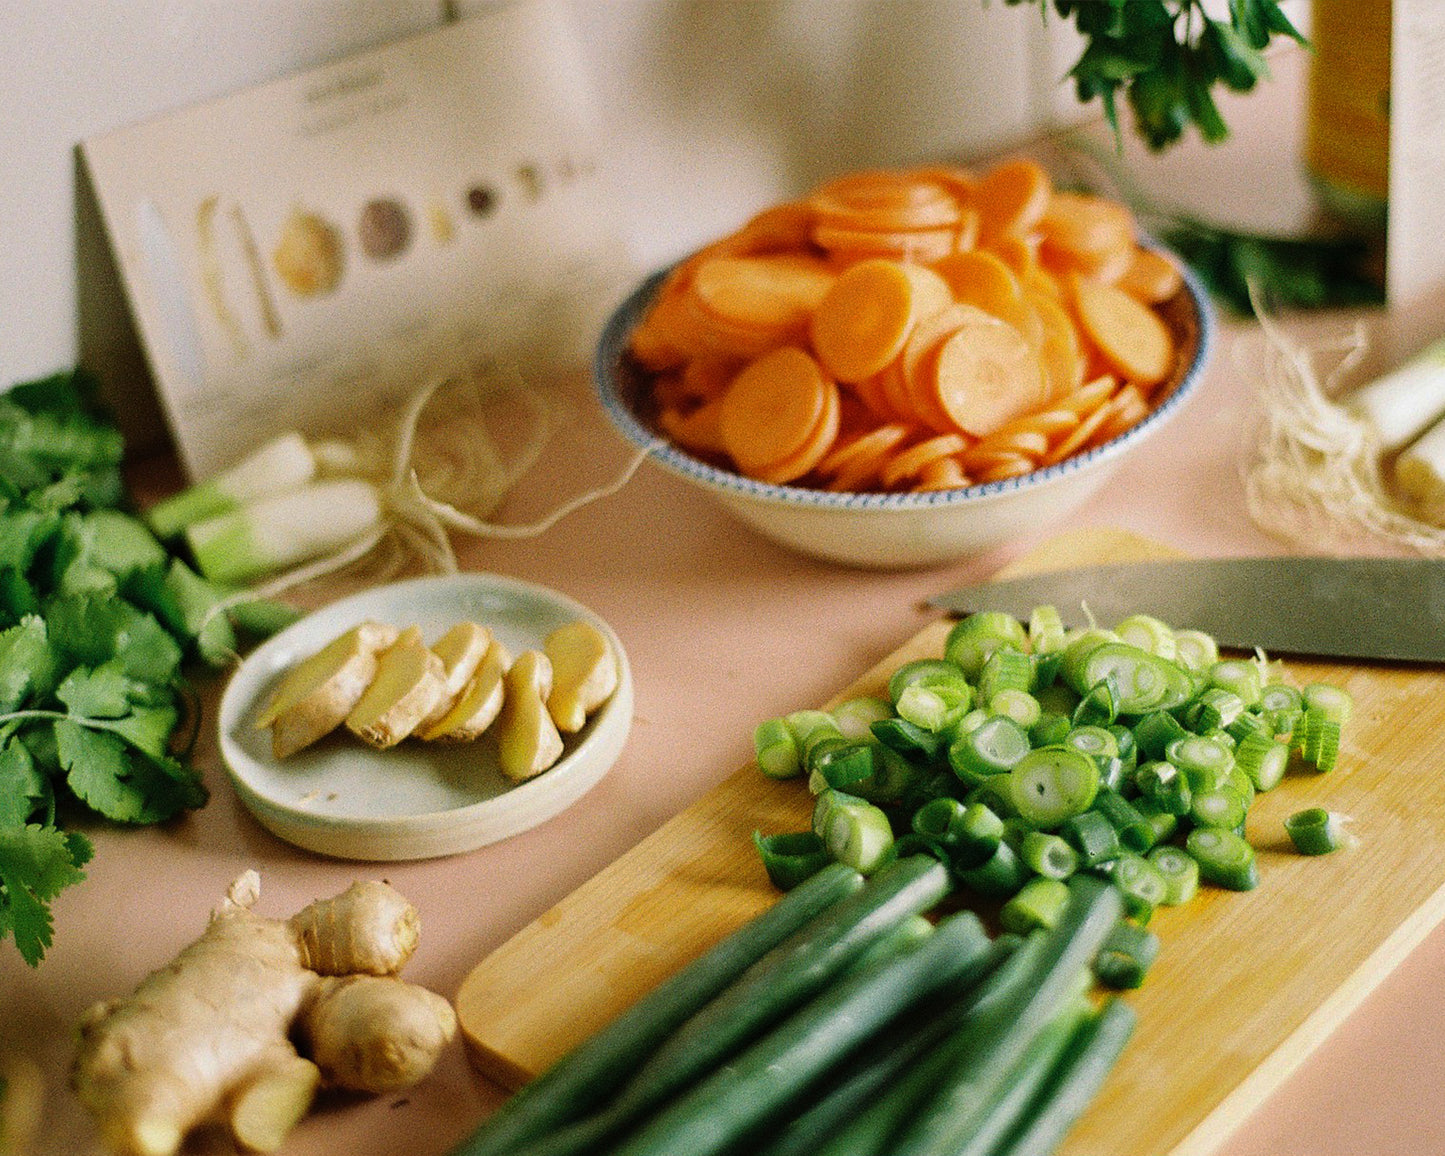 Kitchen bench preparing herbal soup with ginger, spring onion, carrots, ginger and cooking instructions. Image 3